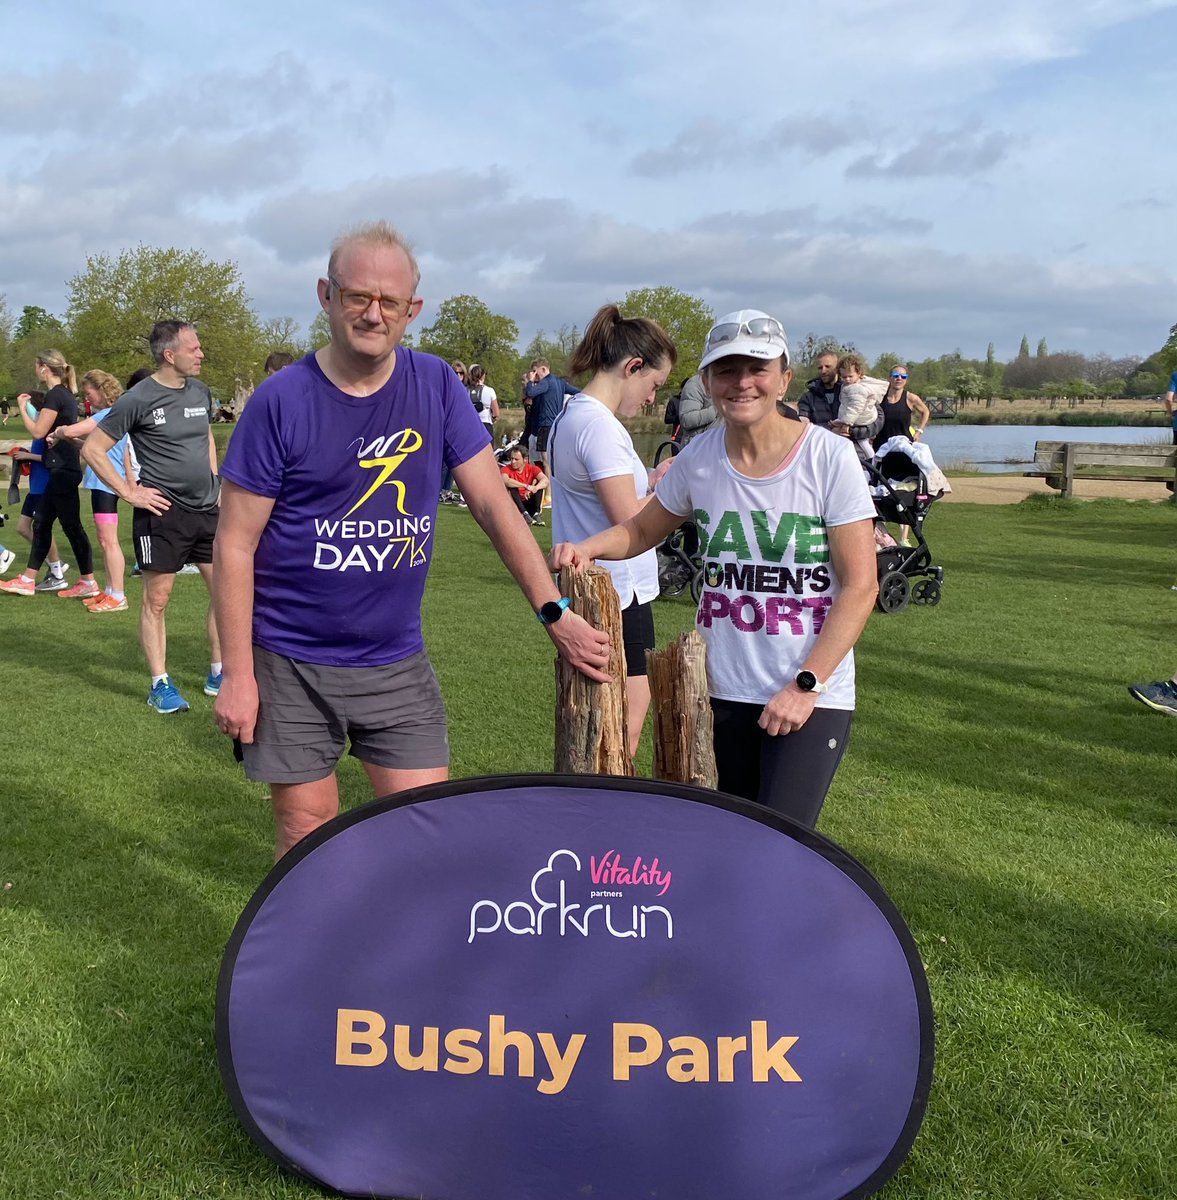 Excellent outing to Bushy parkrun today with my #SaveWomensSports friends @DerryBanShee & Richard. Thank you to the #volunteers. 🙏 Such a shame that parkrun think only men & boys deserve fairness but not women & girls. #makeparkrunfairforfemales